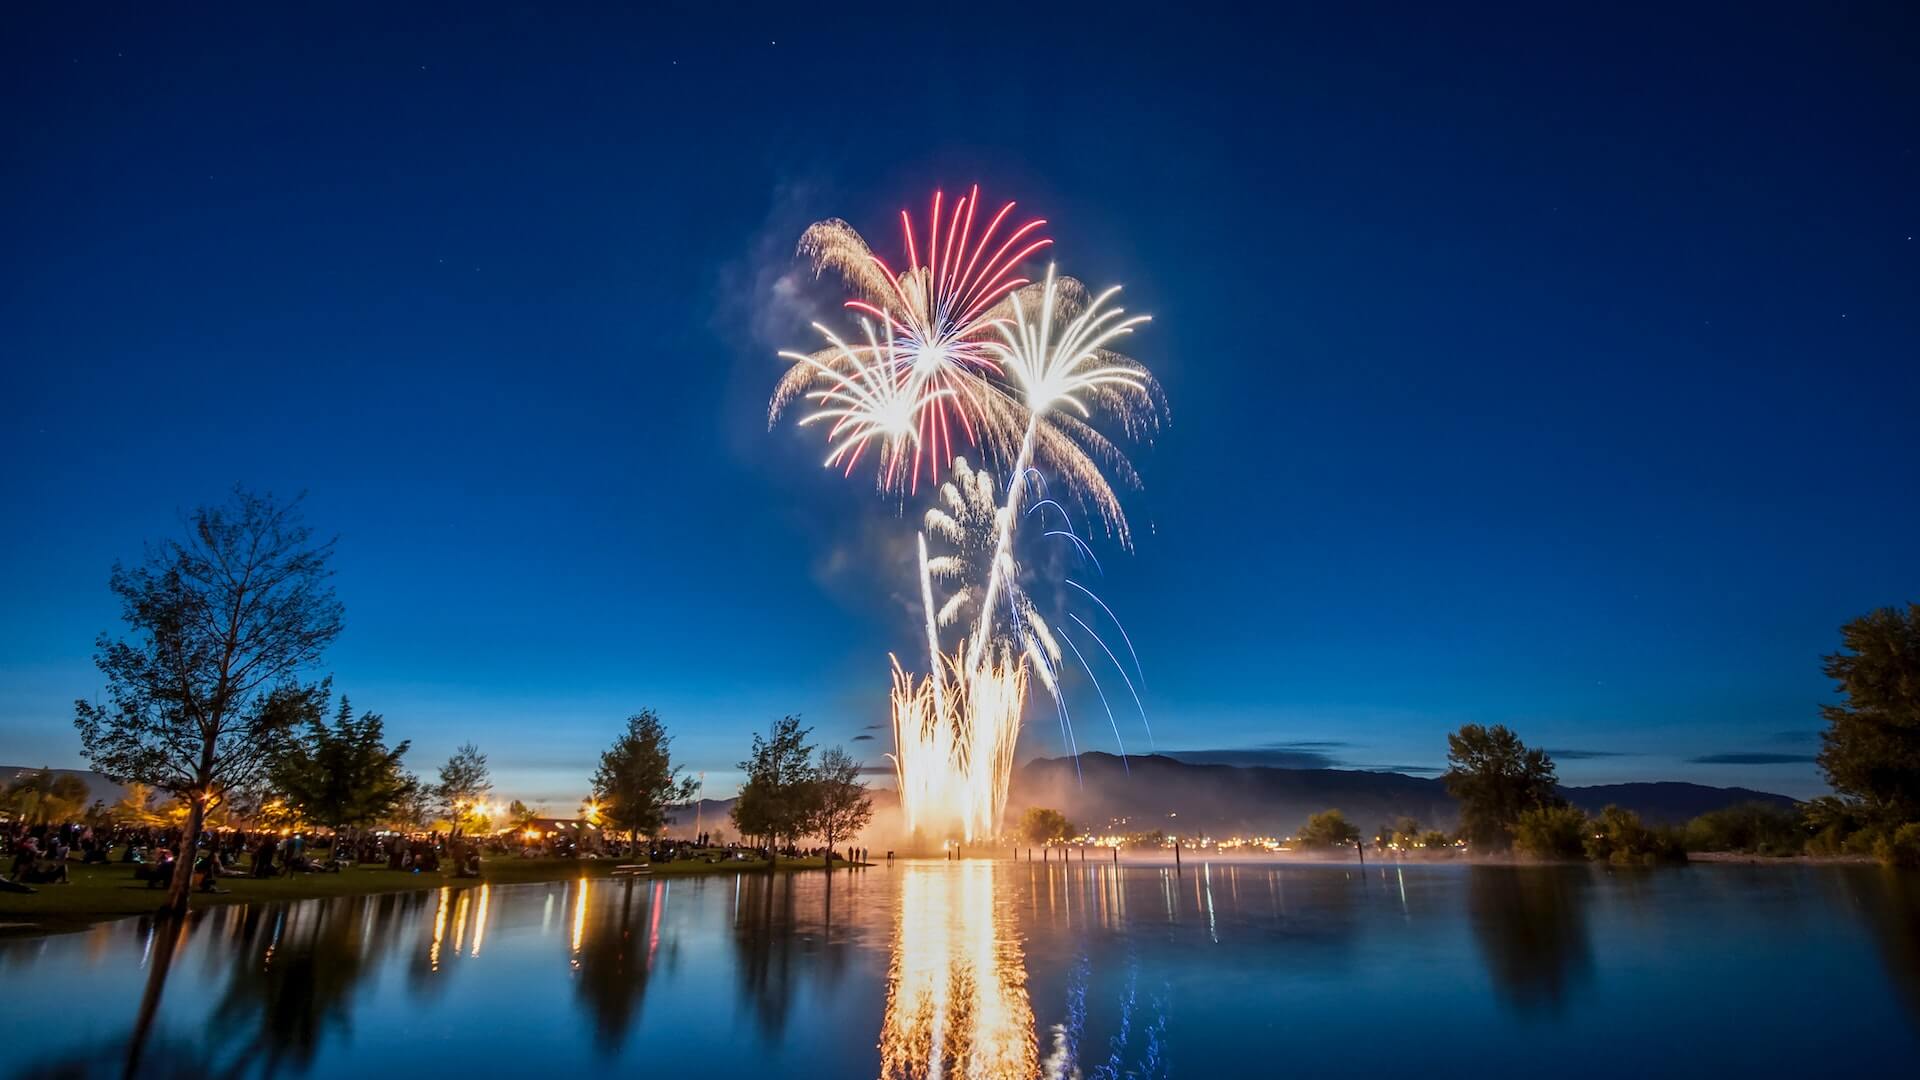 Tips For Photographing Fireworks